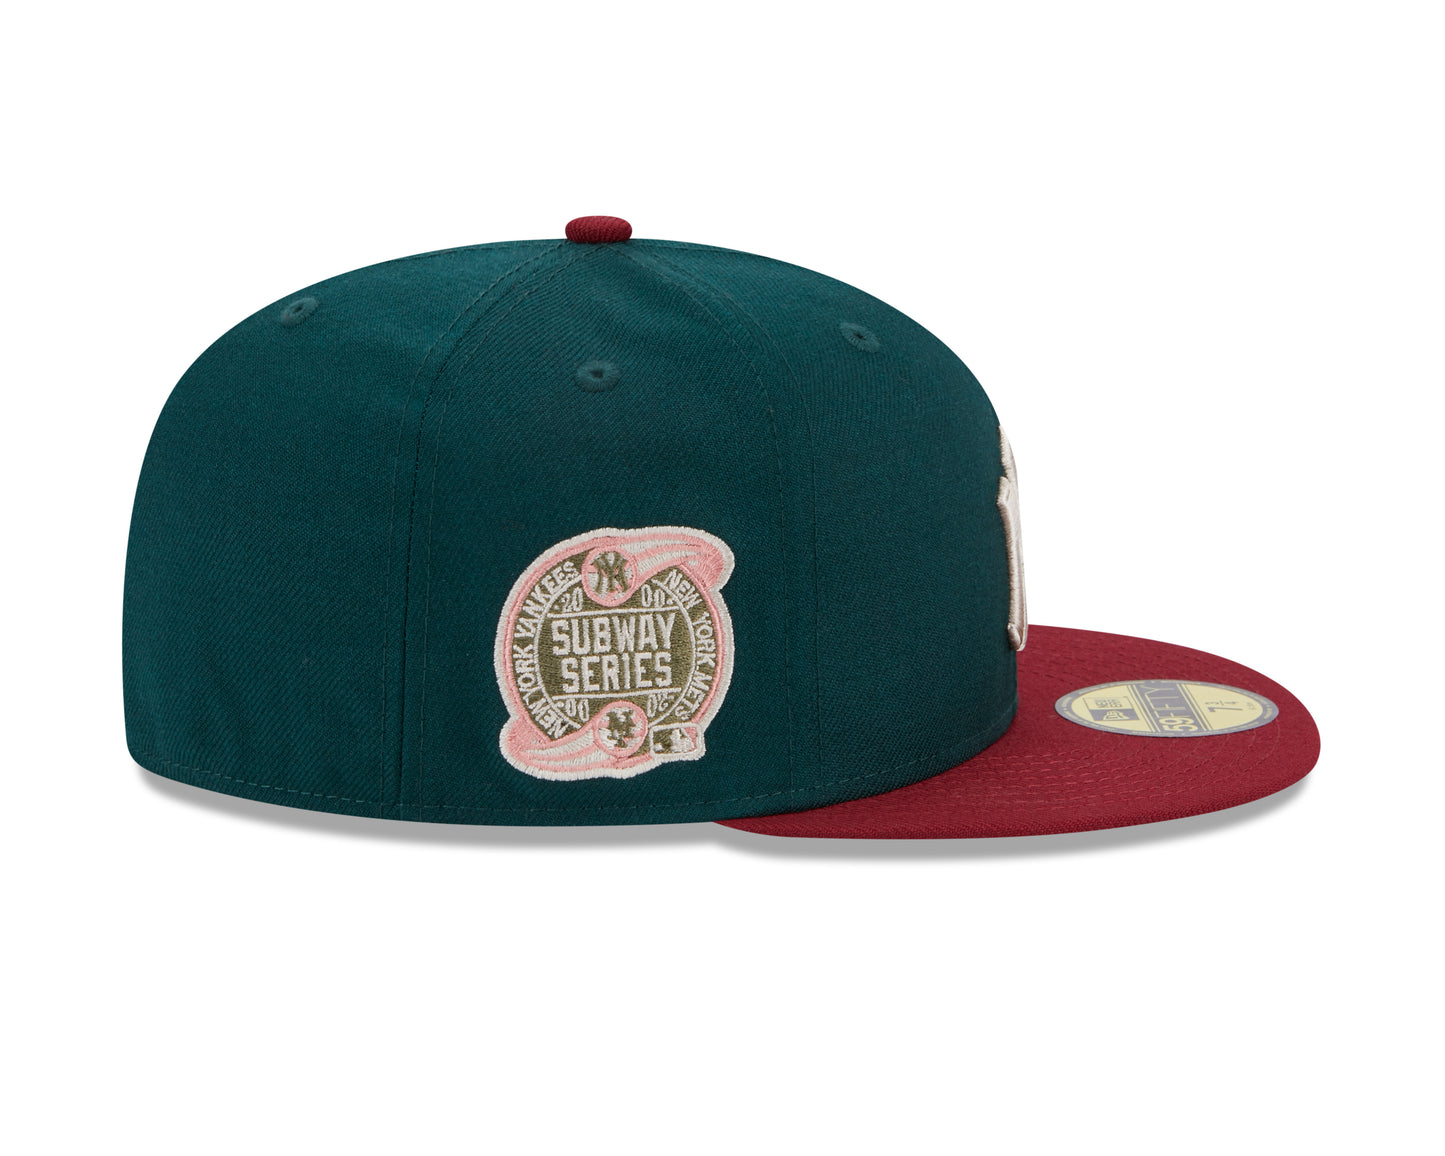 New Era - MLB WS Contrast 59Fifty Fitted - New York Yankees - Green/Red - Headz Up 